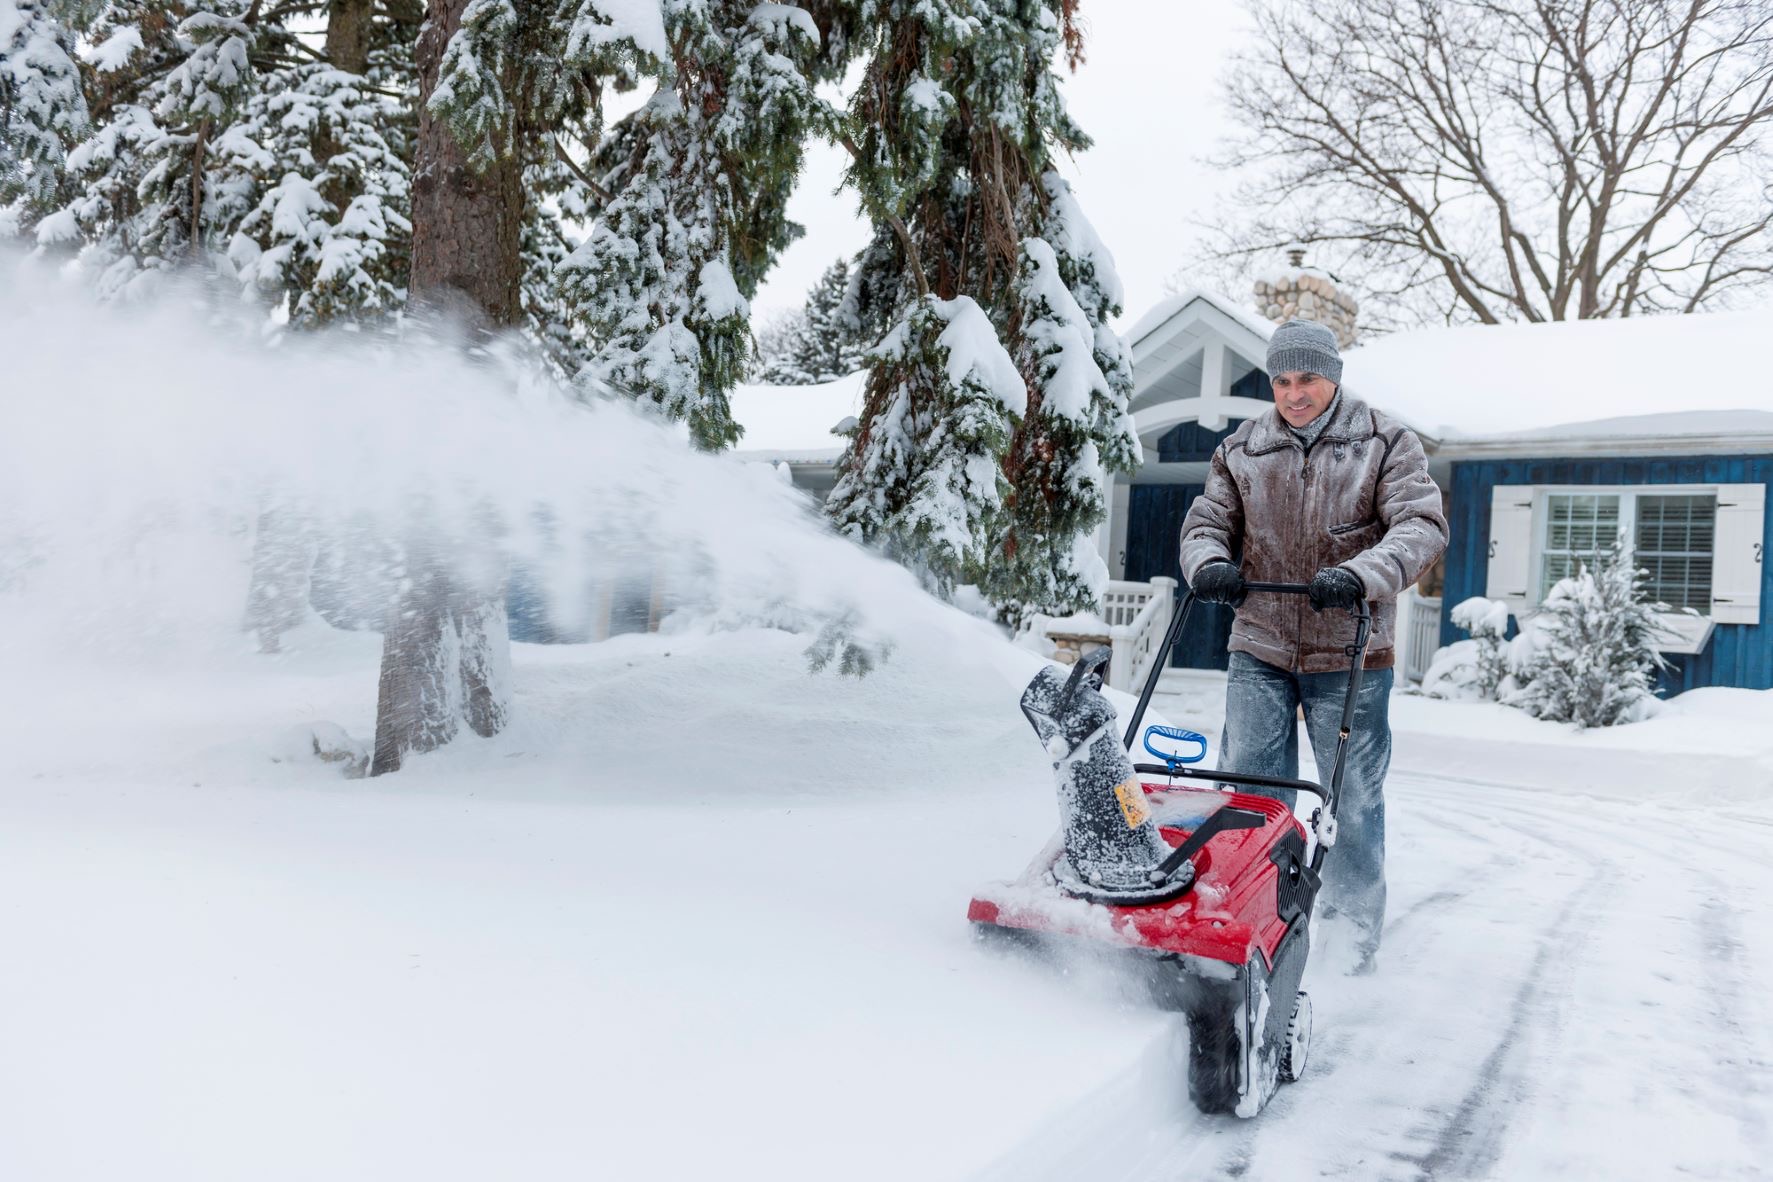 12 QUESTIONS TO ASK BEFORE POWERING UP THE SNOW THROWER